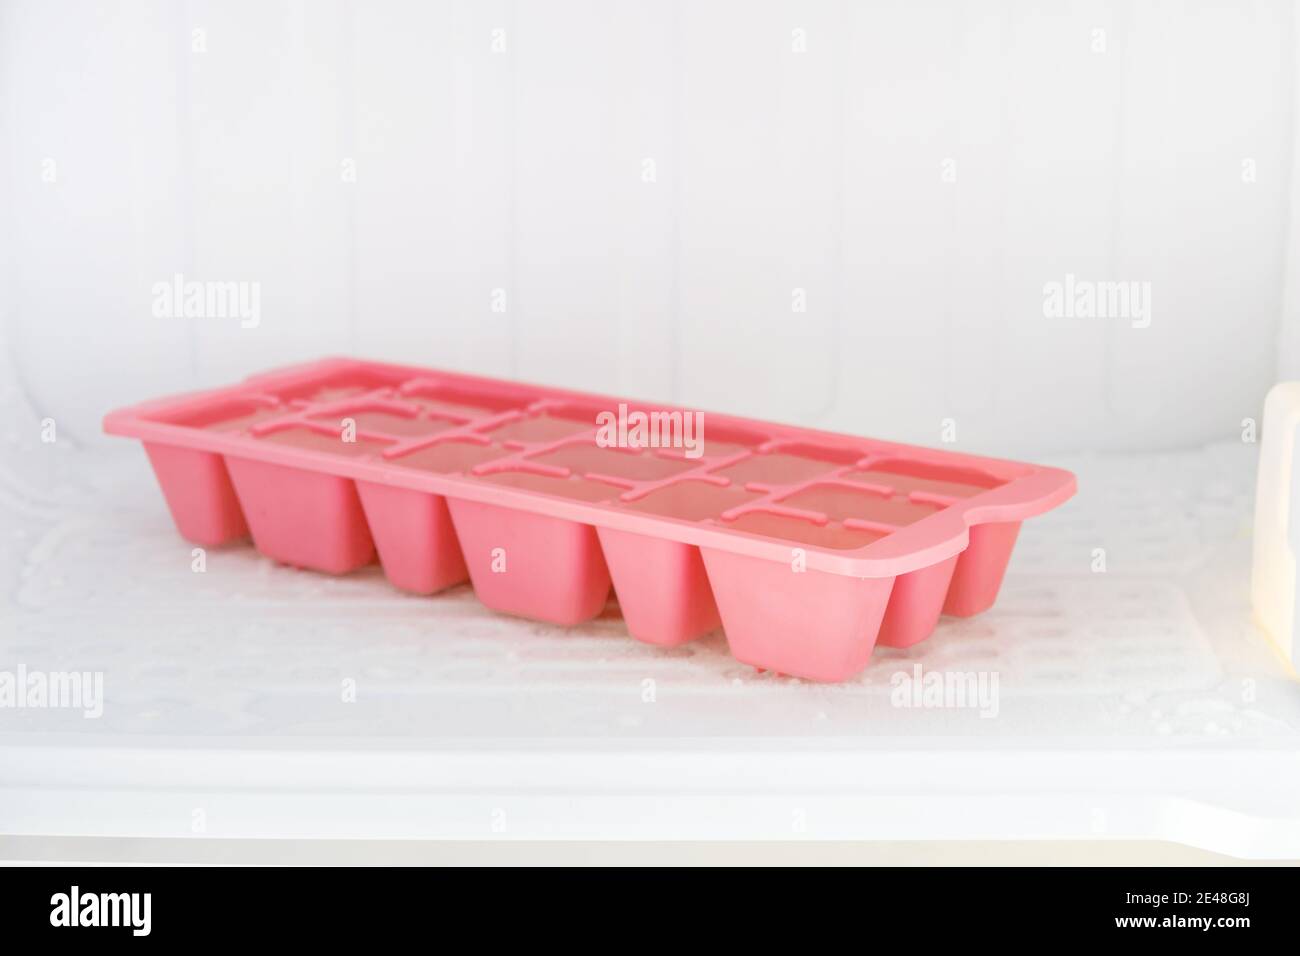 https://c8.alamy.com/comp/2E48G8J/colorful-plastic-ice-tray-in-the-freezer-compartment-of-the-refrigerator-2E48G8J.jpg